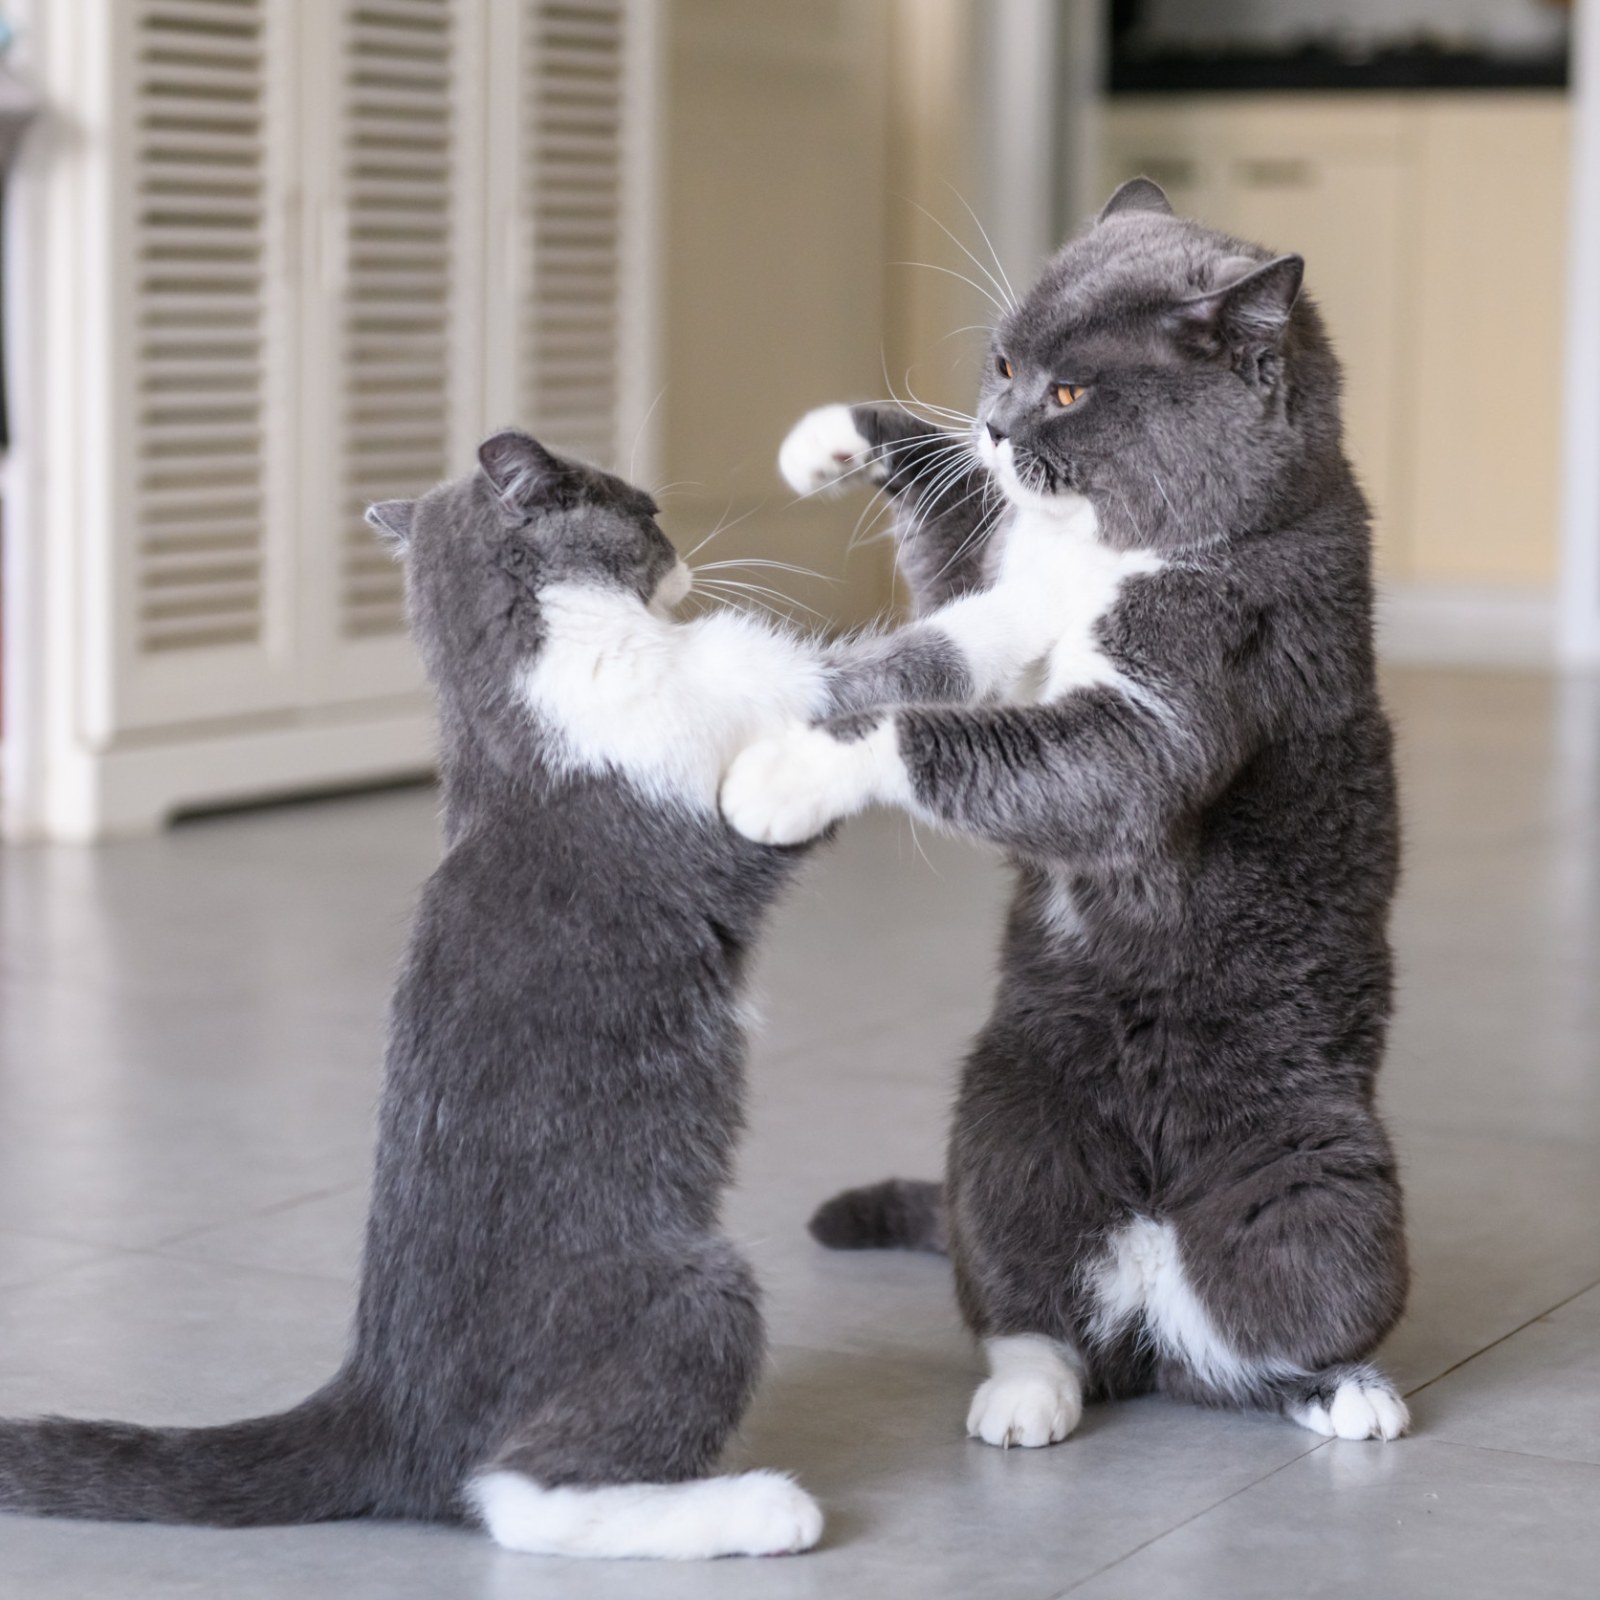 Two Cats 'Fighting Respectfully' Have Internet in Hysterics